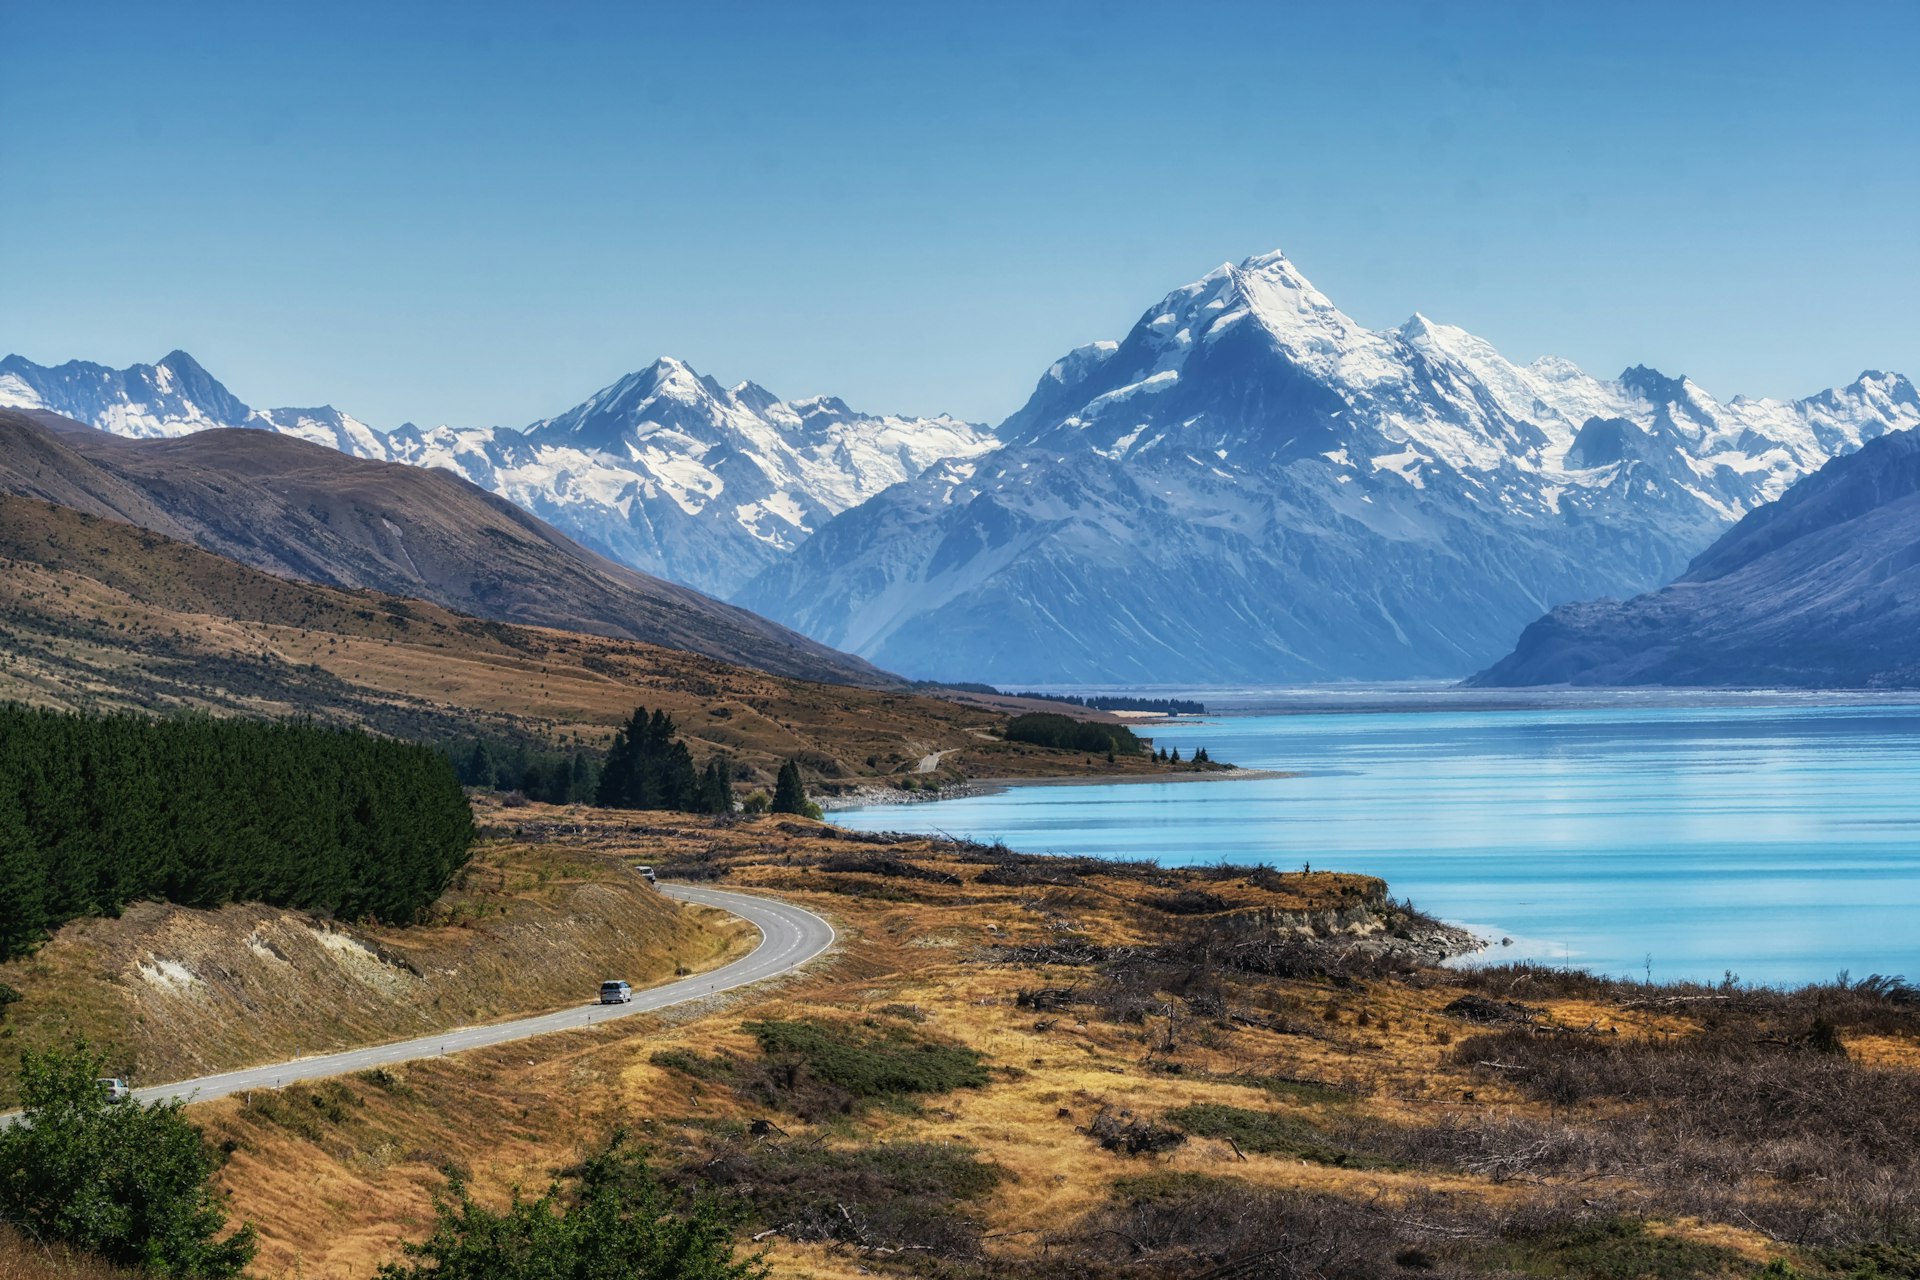 mount cook viewpoint with the lake pukaki and the road leading to Aoraki. Taken during summer in New Zealand.